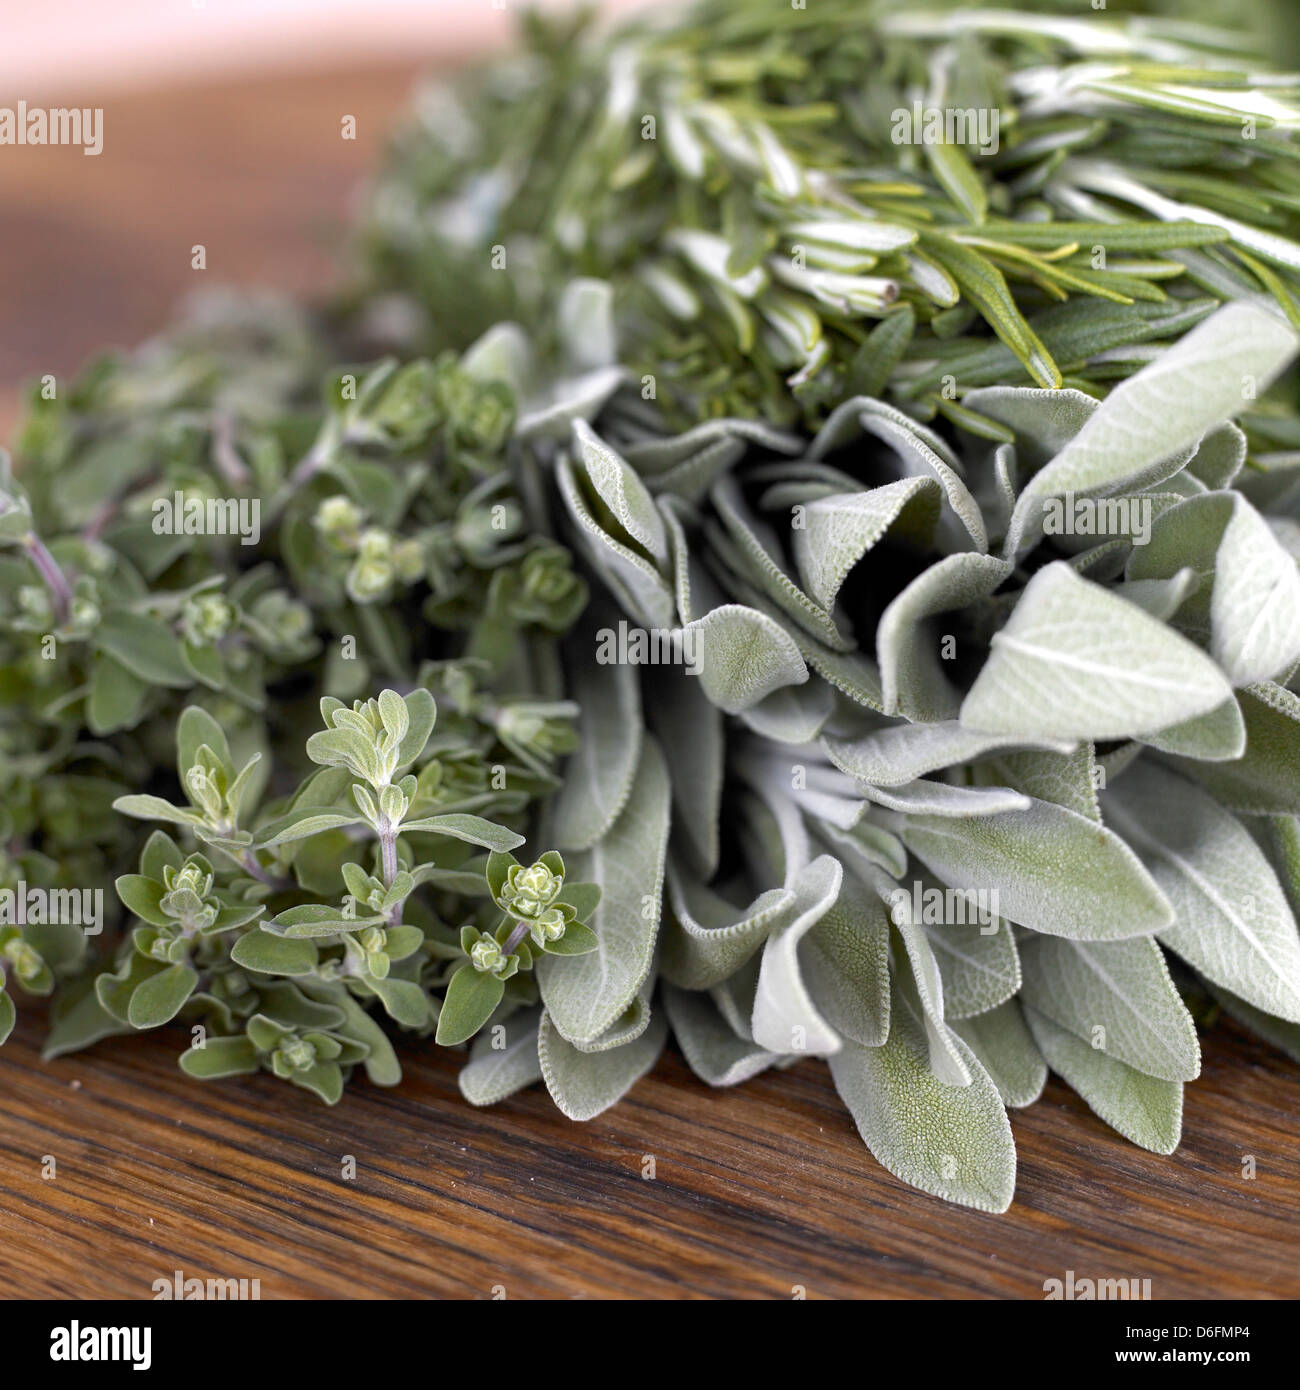 Sage,Thyme and Rosemary Stock Photo